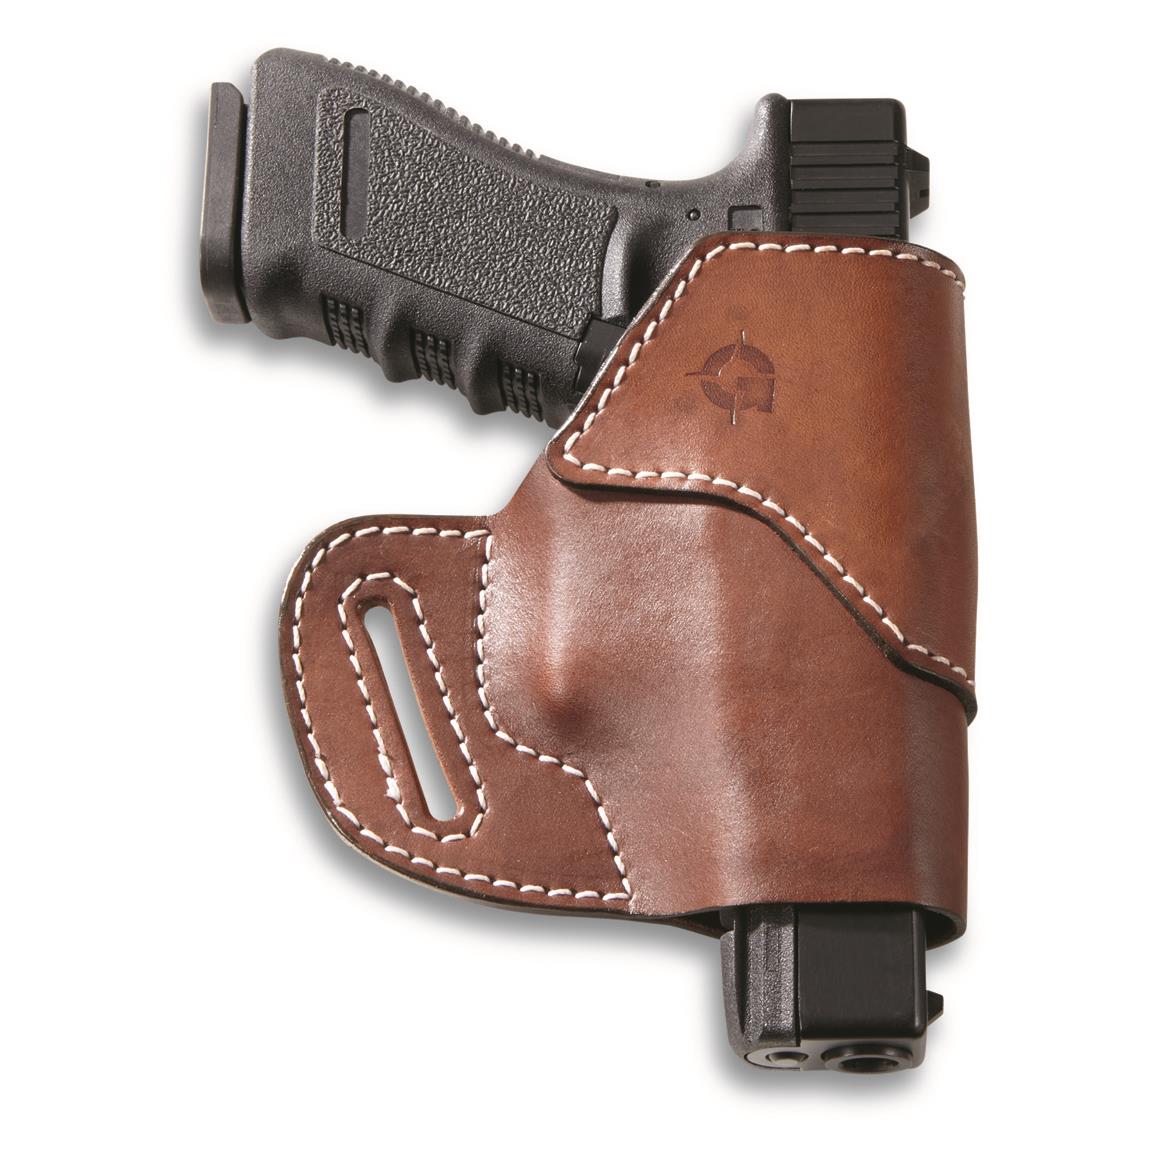 Guide Gear Universal IWB/OWB Hip Holster, Universal Fit